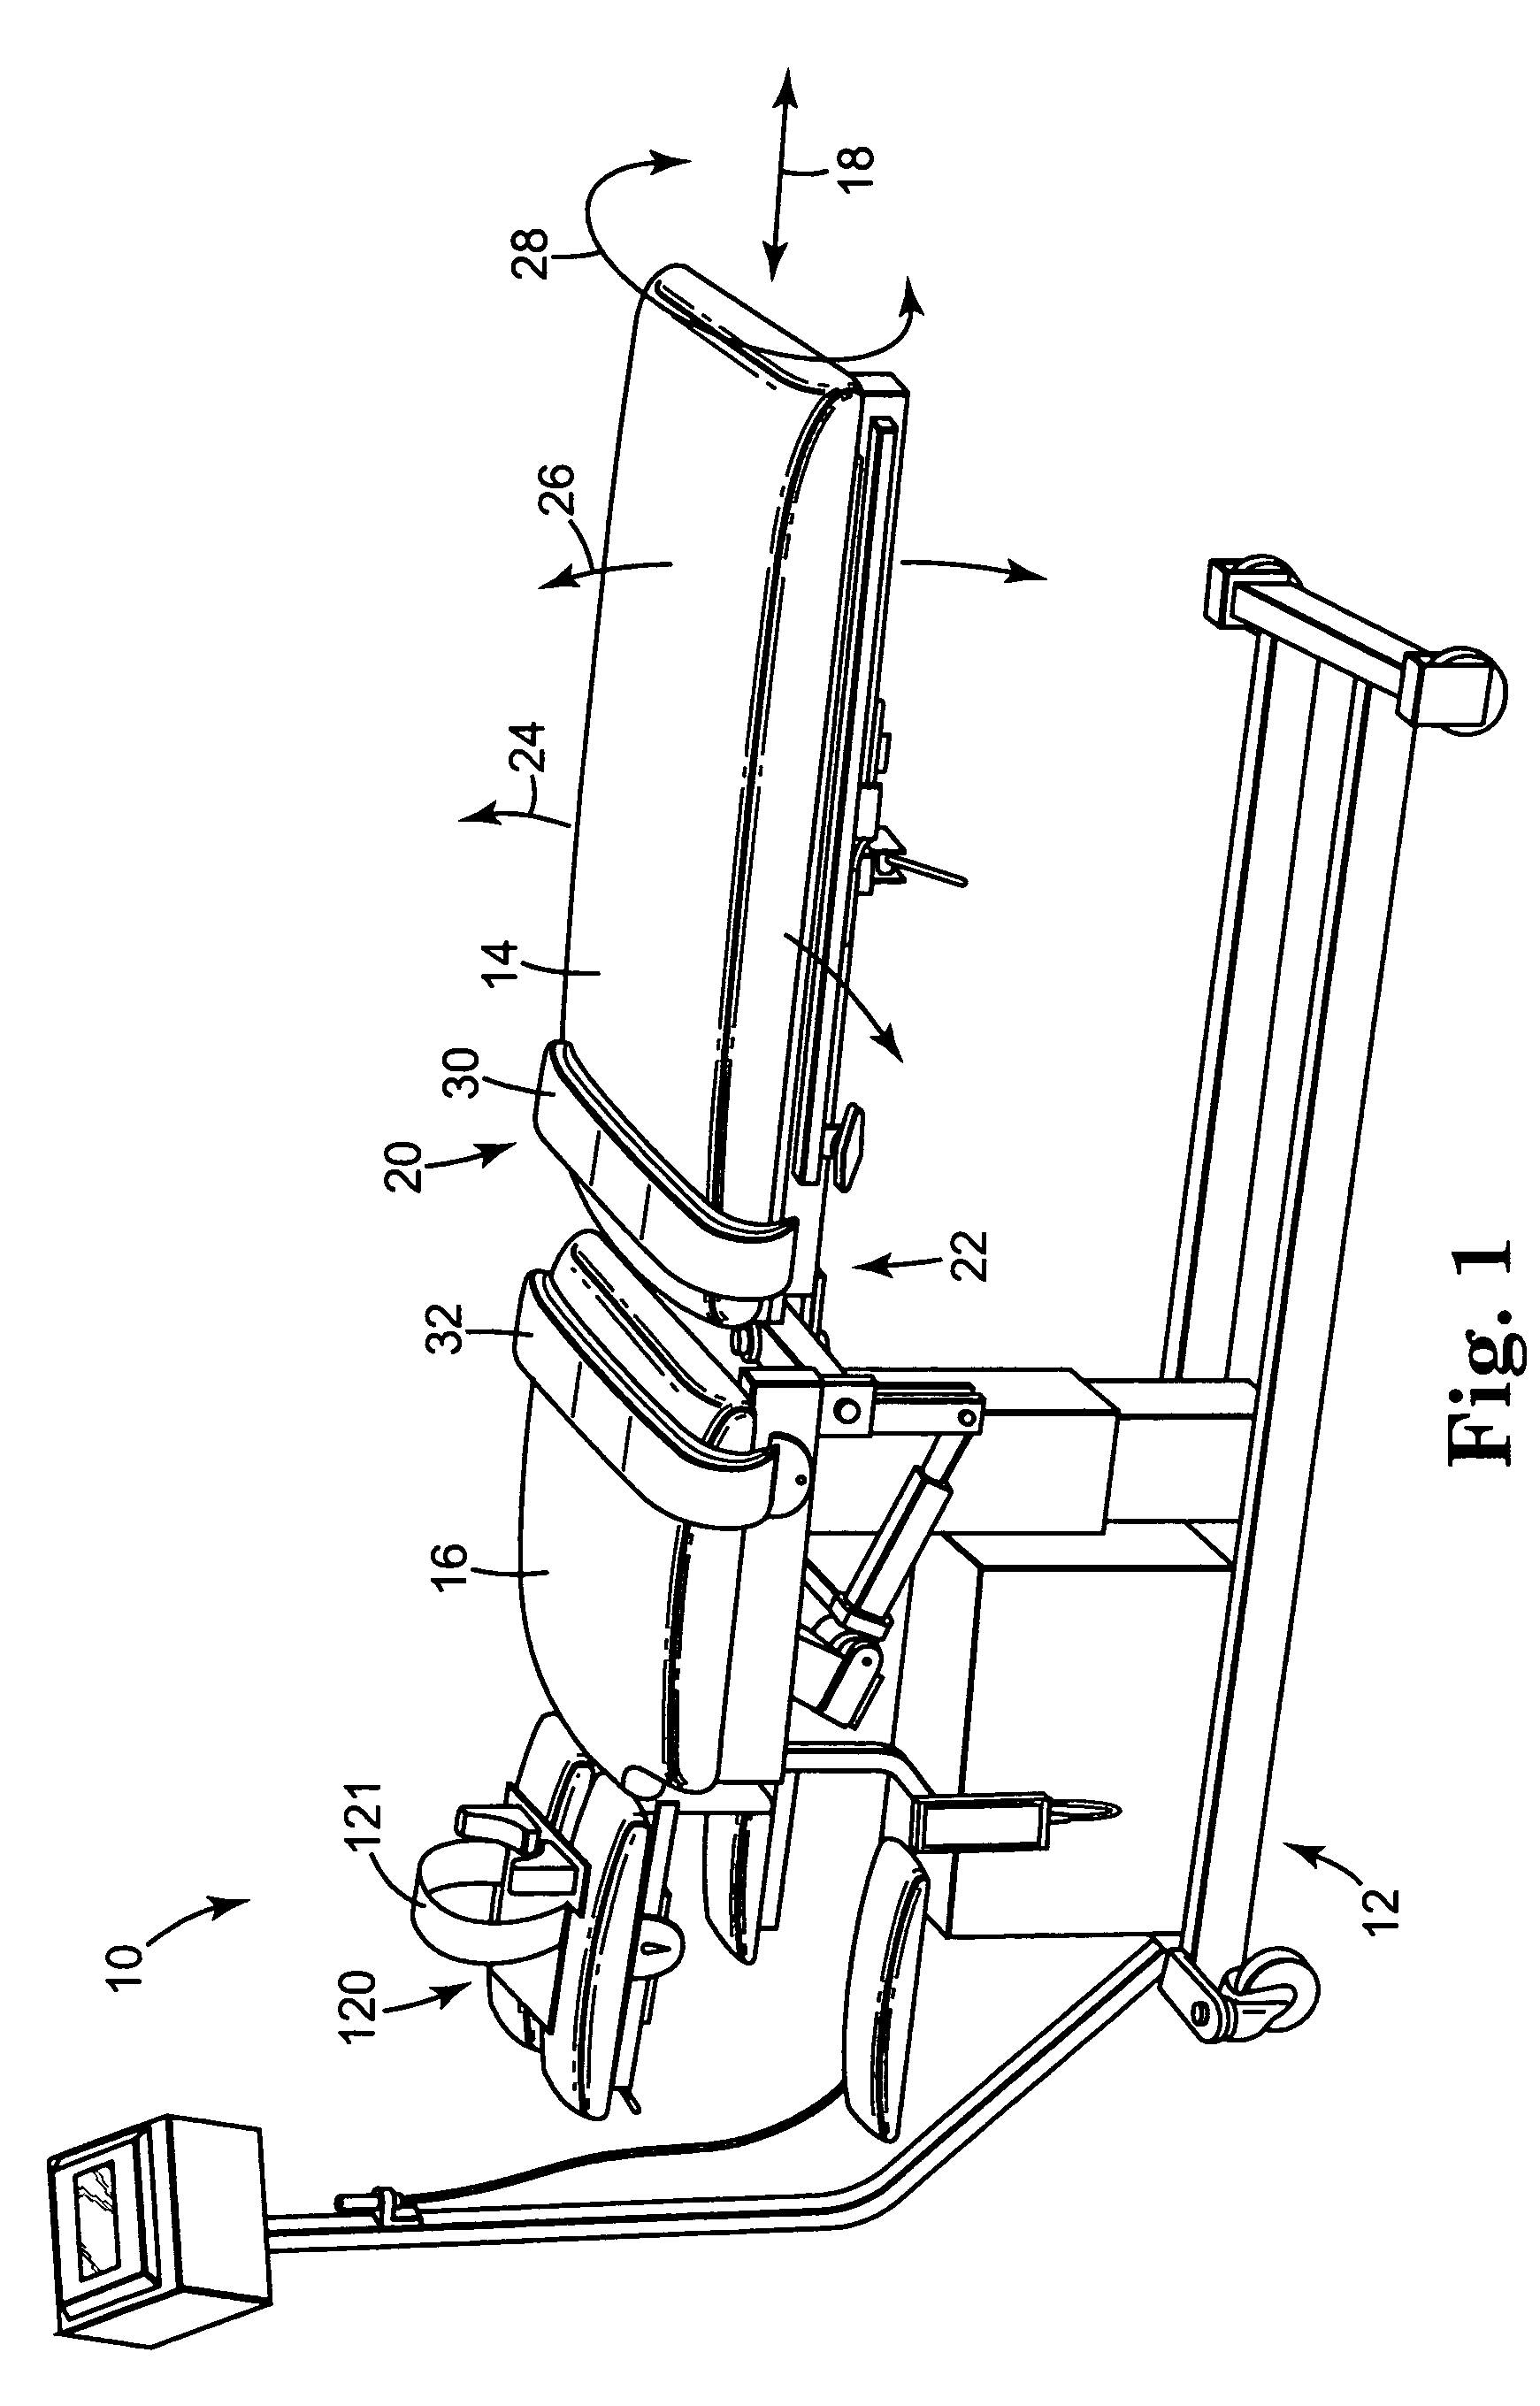 Multi-axis cervical and lumber traction table